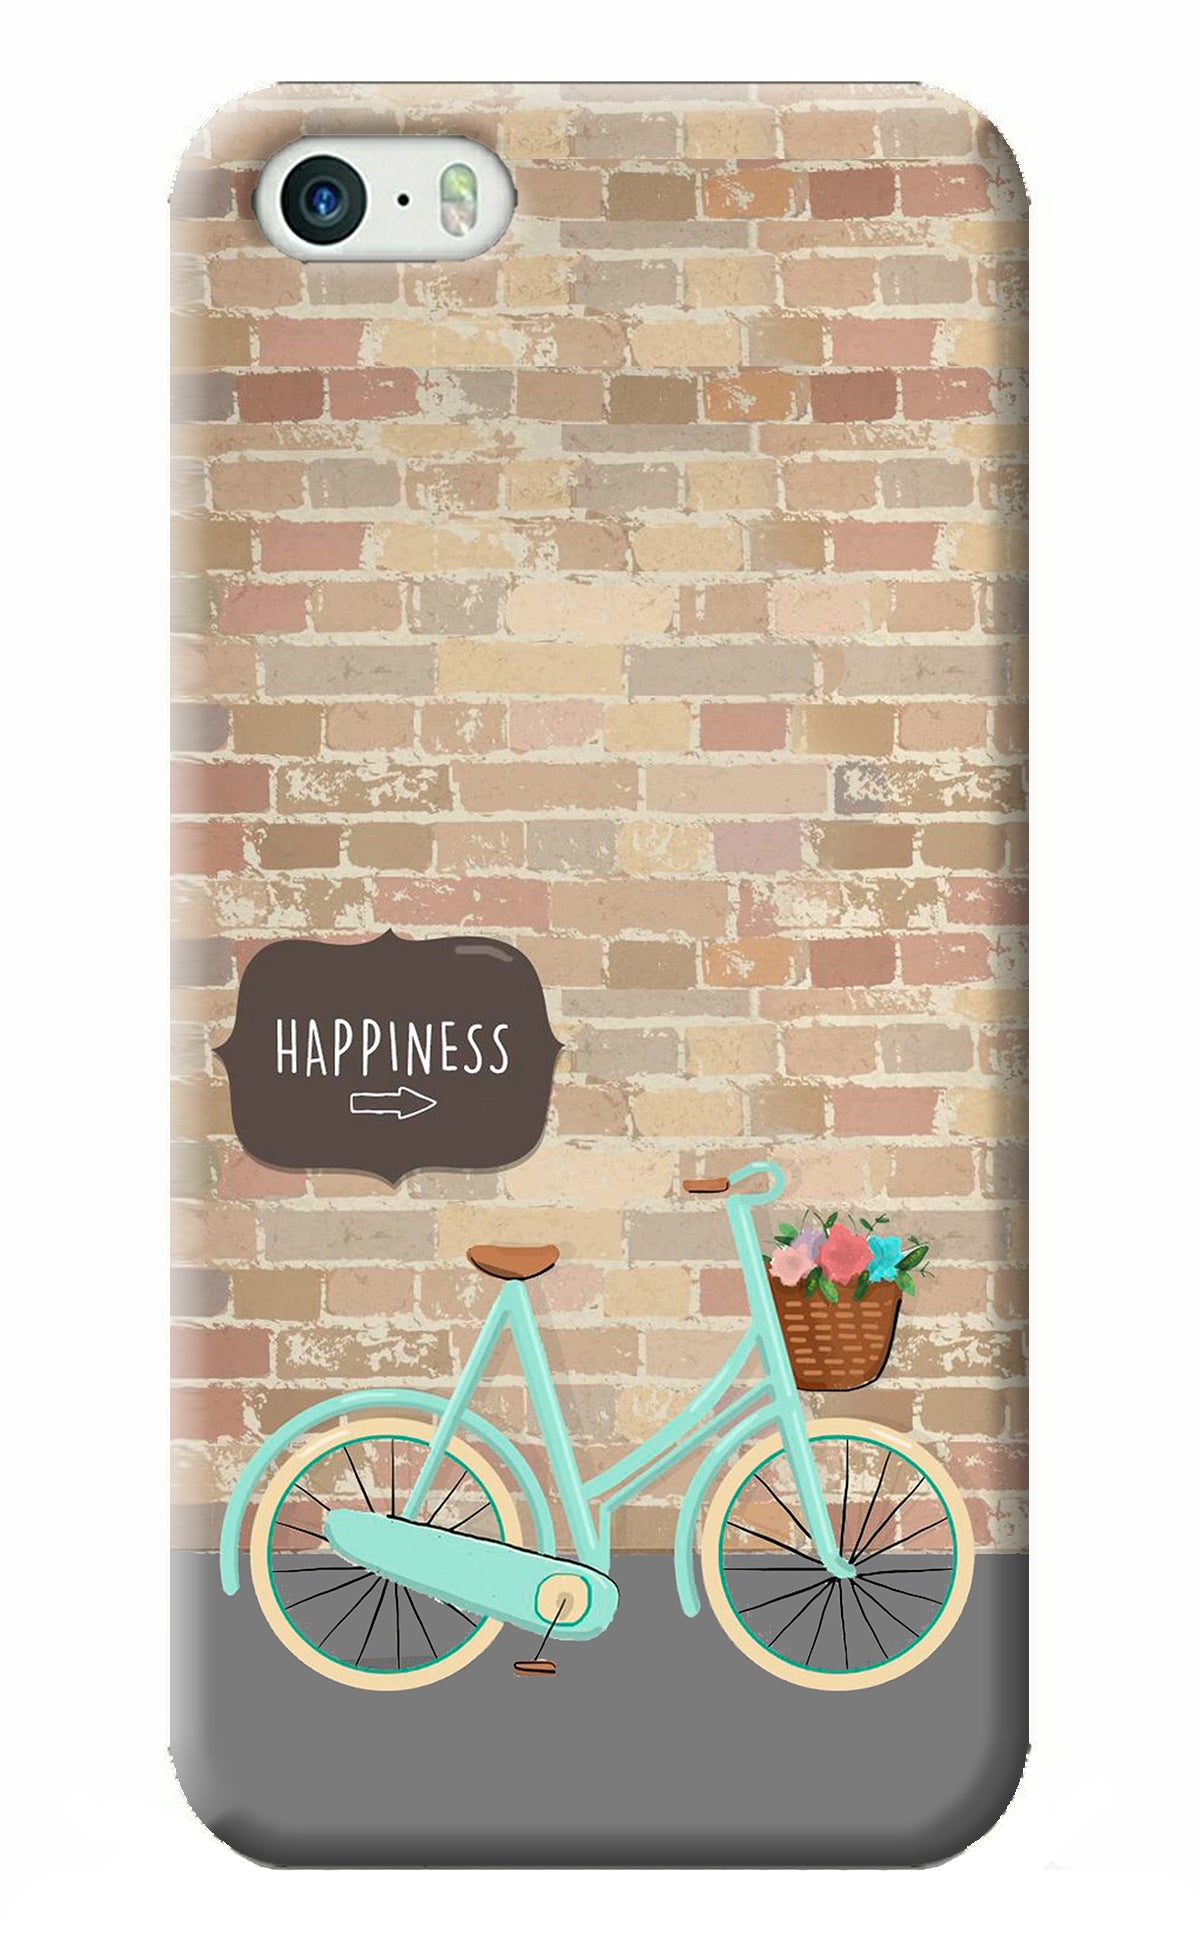 Happiness Artwork iPhone 5/5s Back Cover